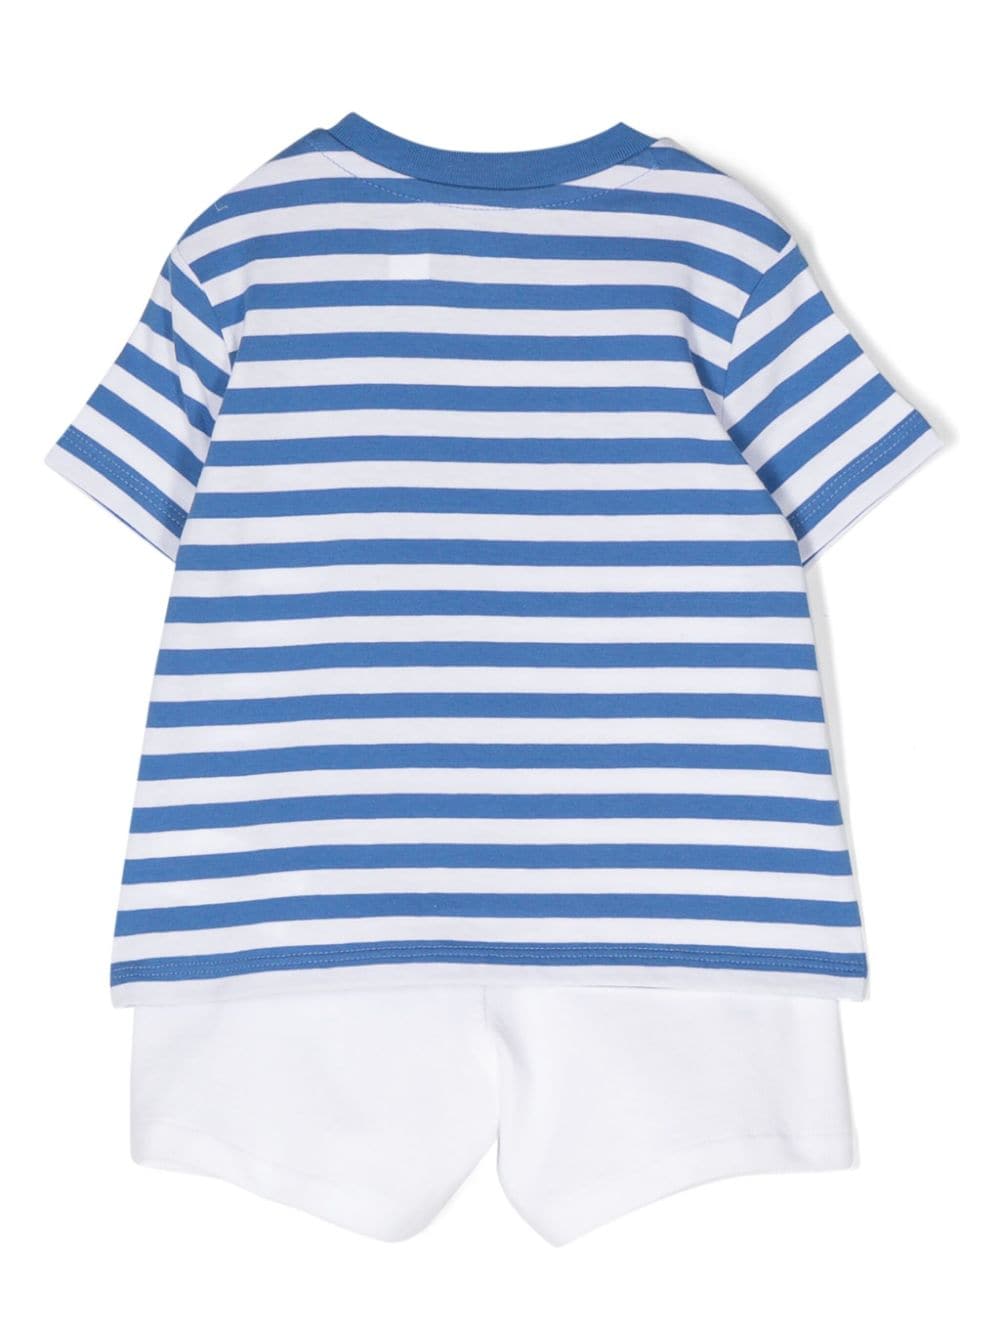 Blue and white T-shirt and Bermuda shorts for newborns